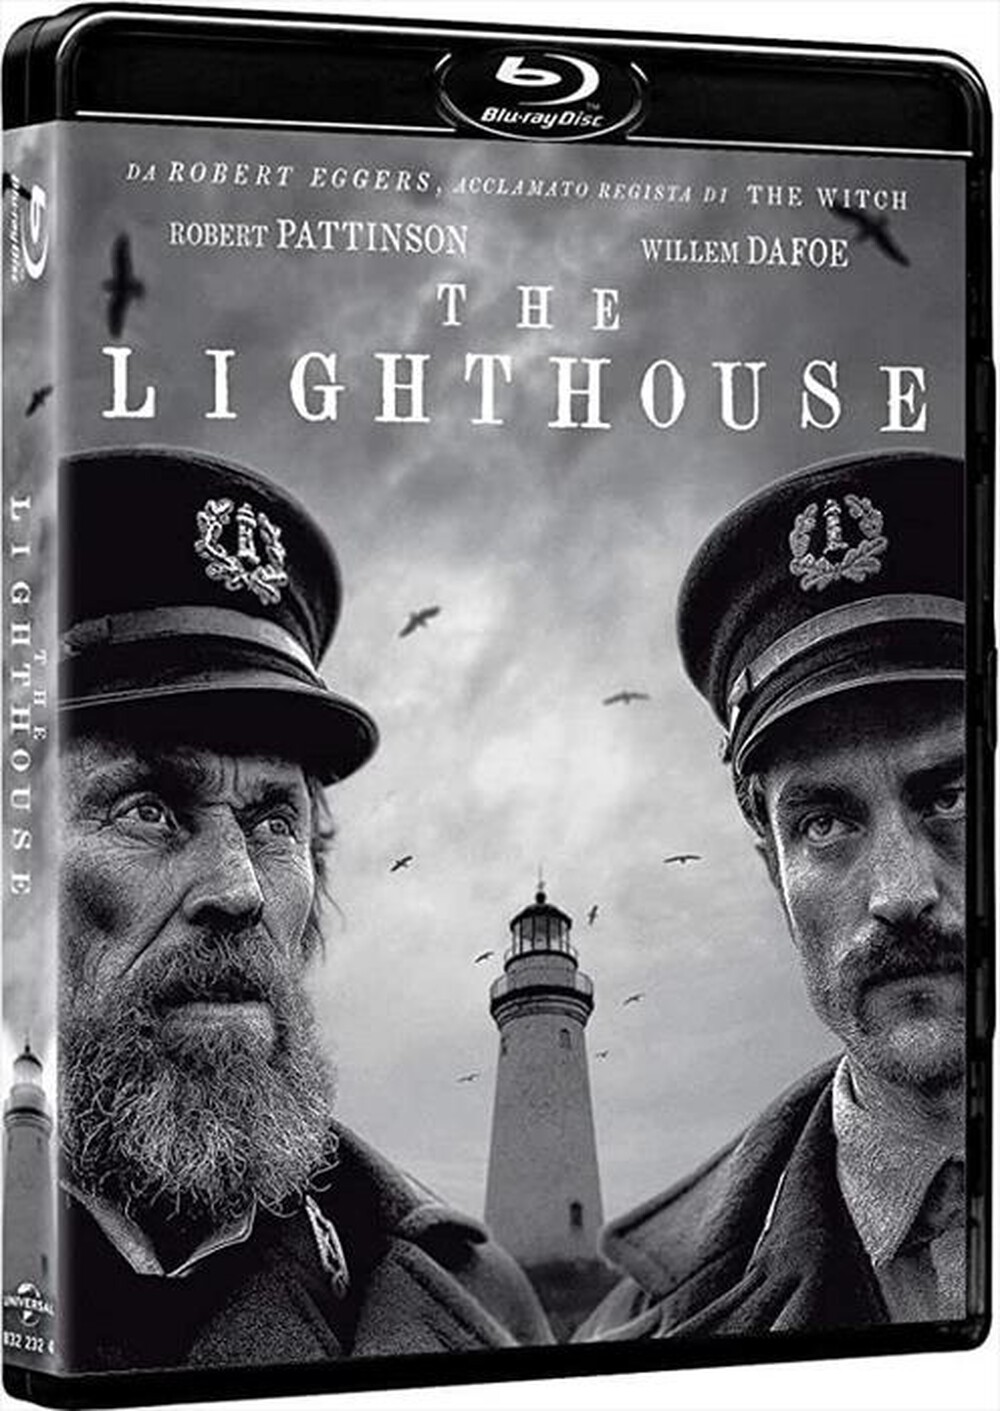 "WARNER HOME VIDEO - Lighthouse (The)"